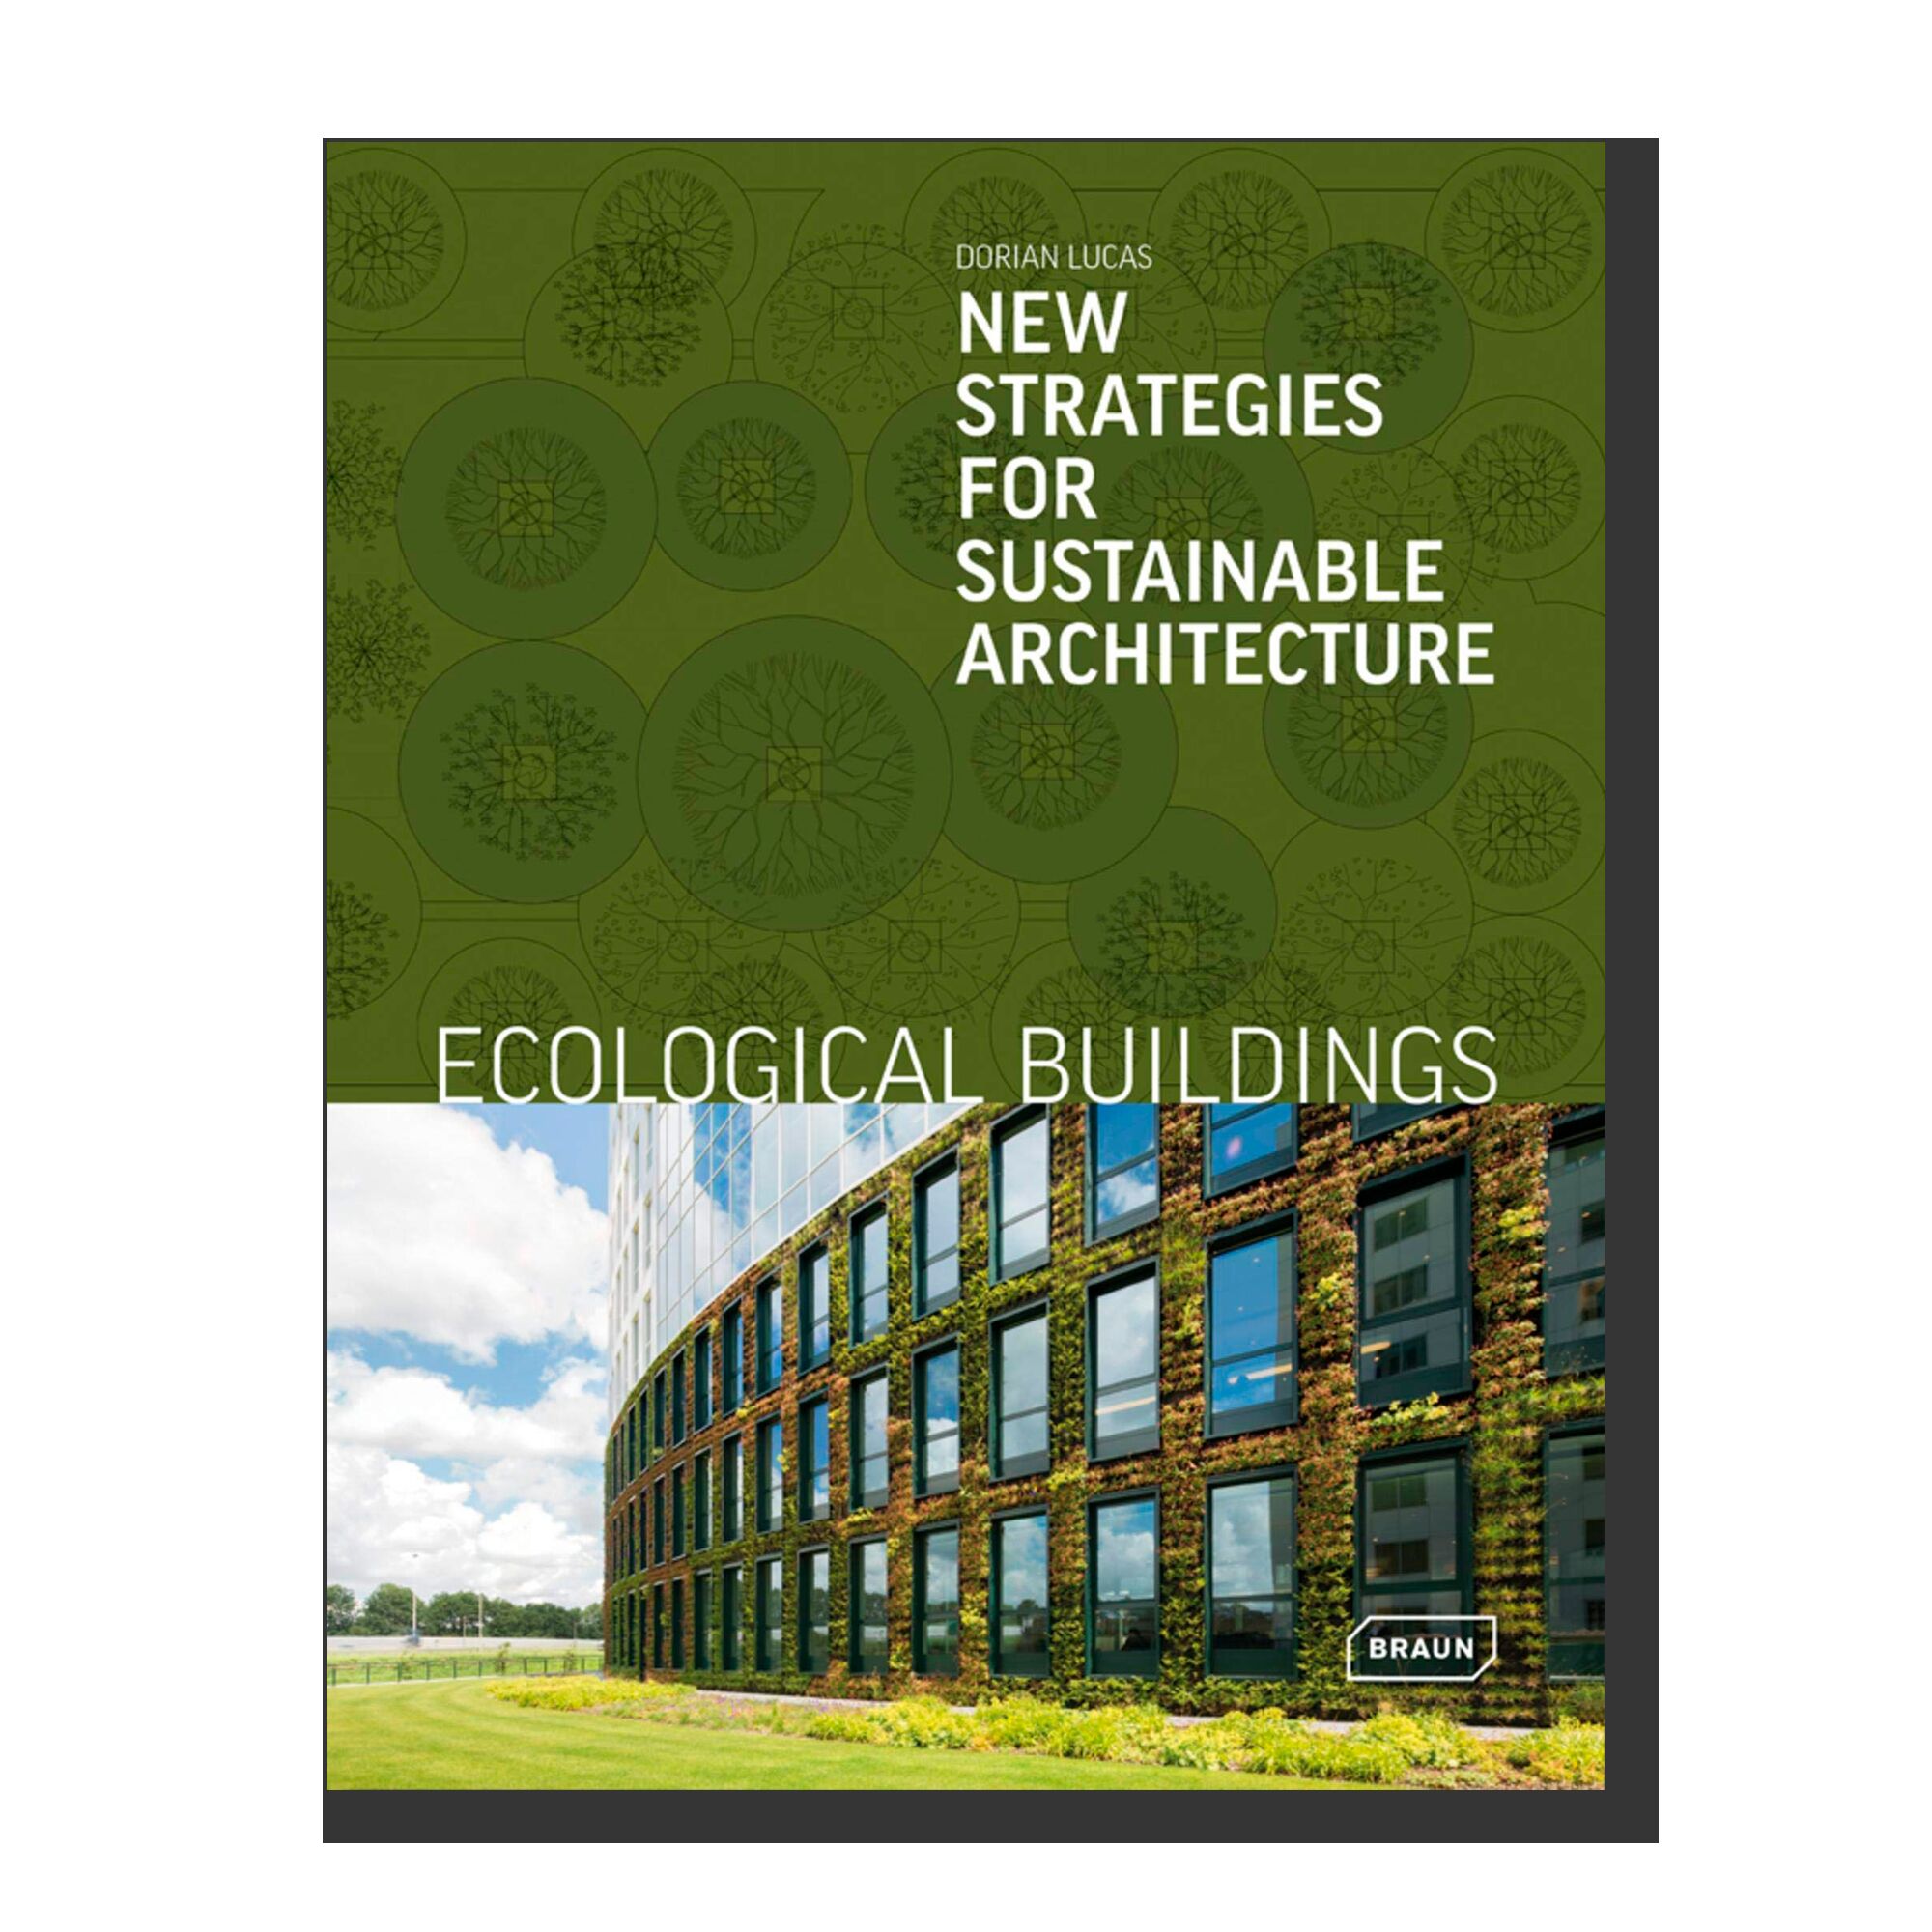 Ecological Buildings: New Strategies for Sustainable Architecture